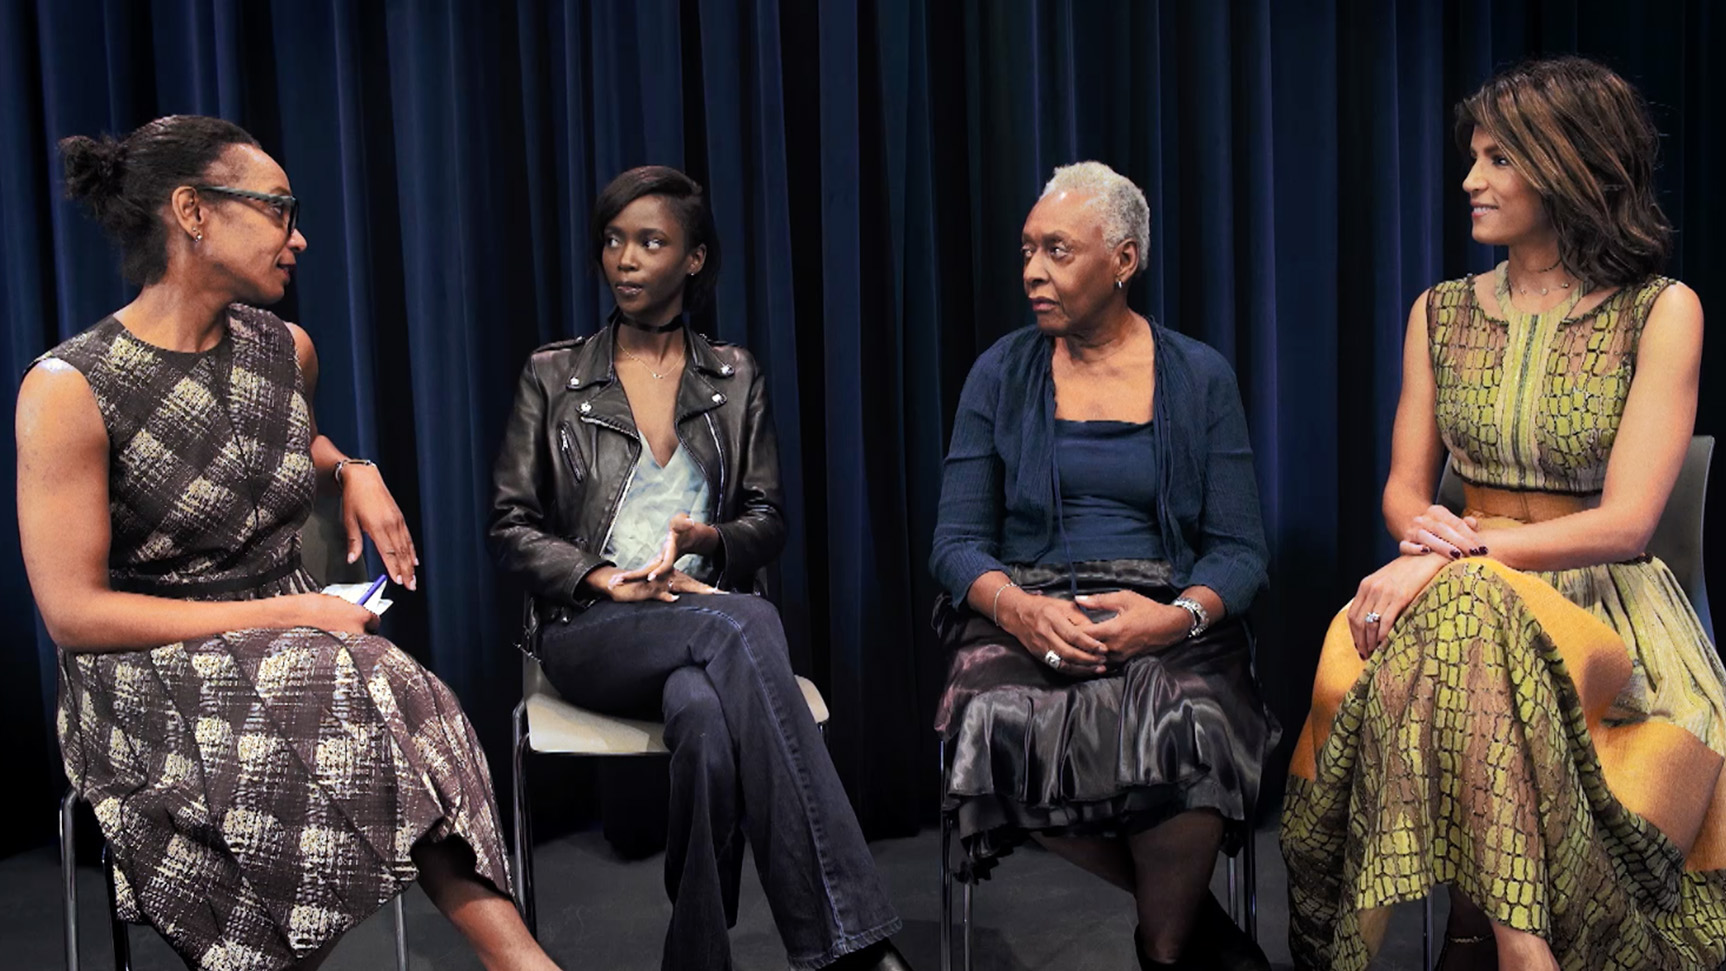 Robin Givhan in conversation with fashion models Bethann Hardison, Riley Montana, and Veronica Webb